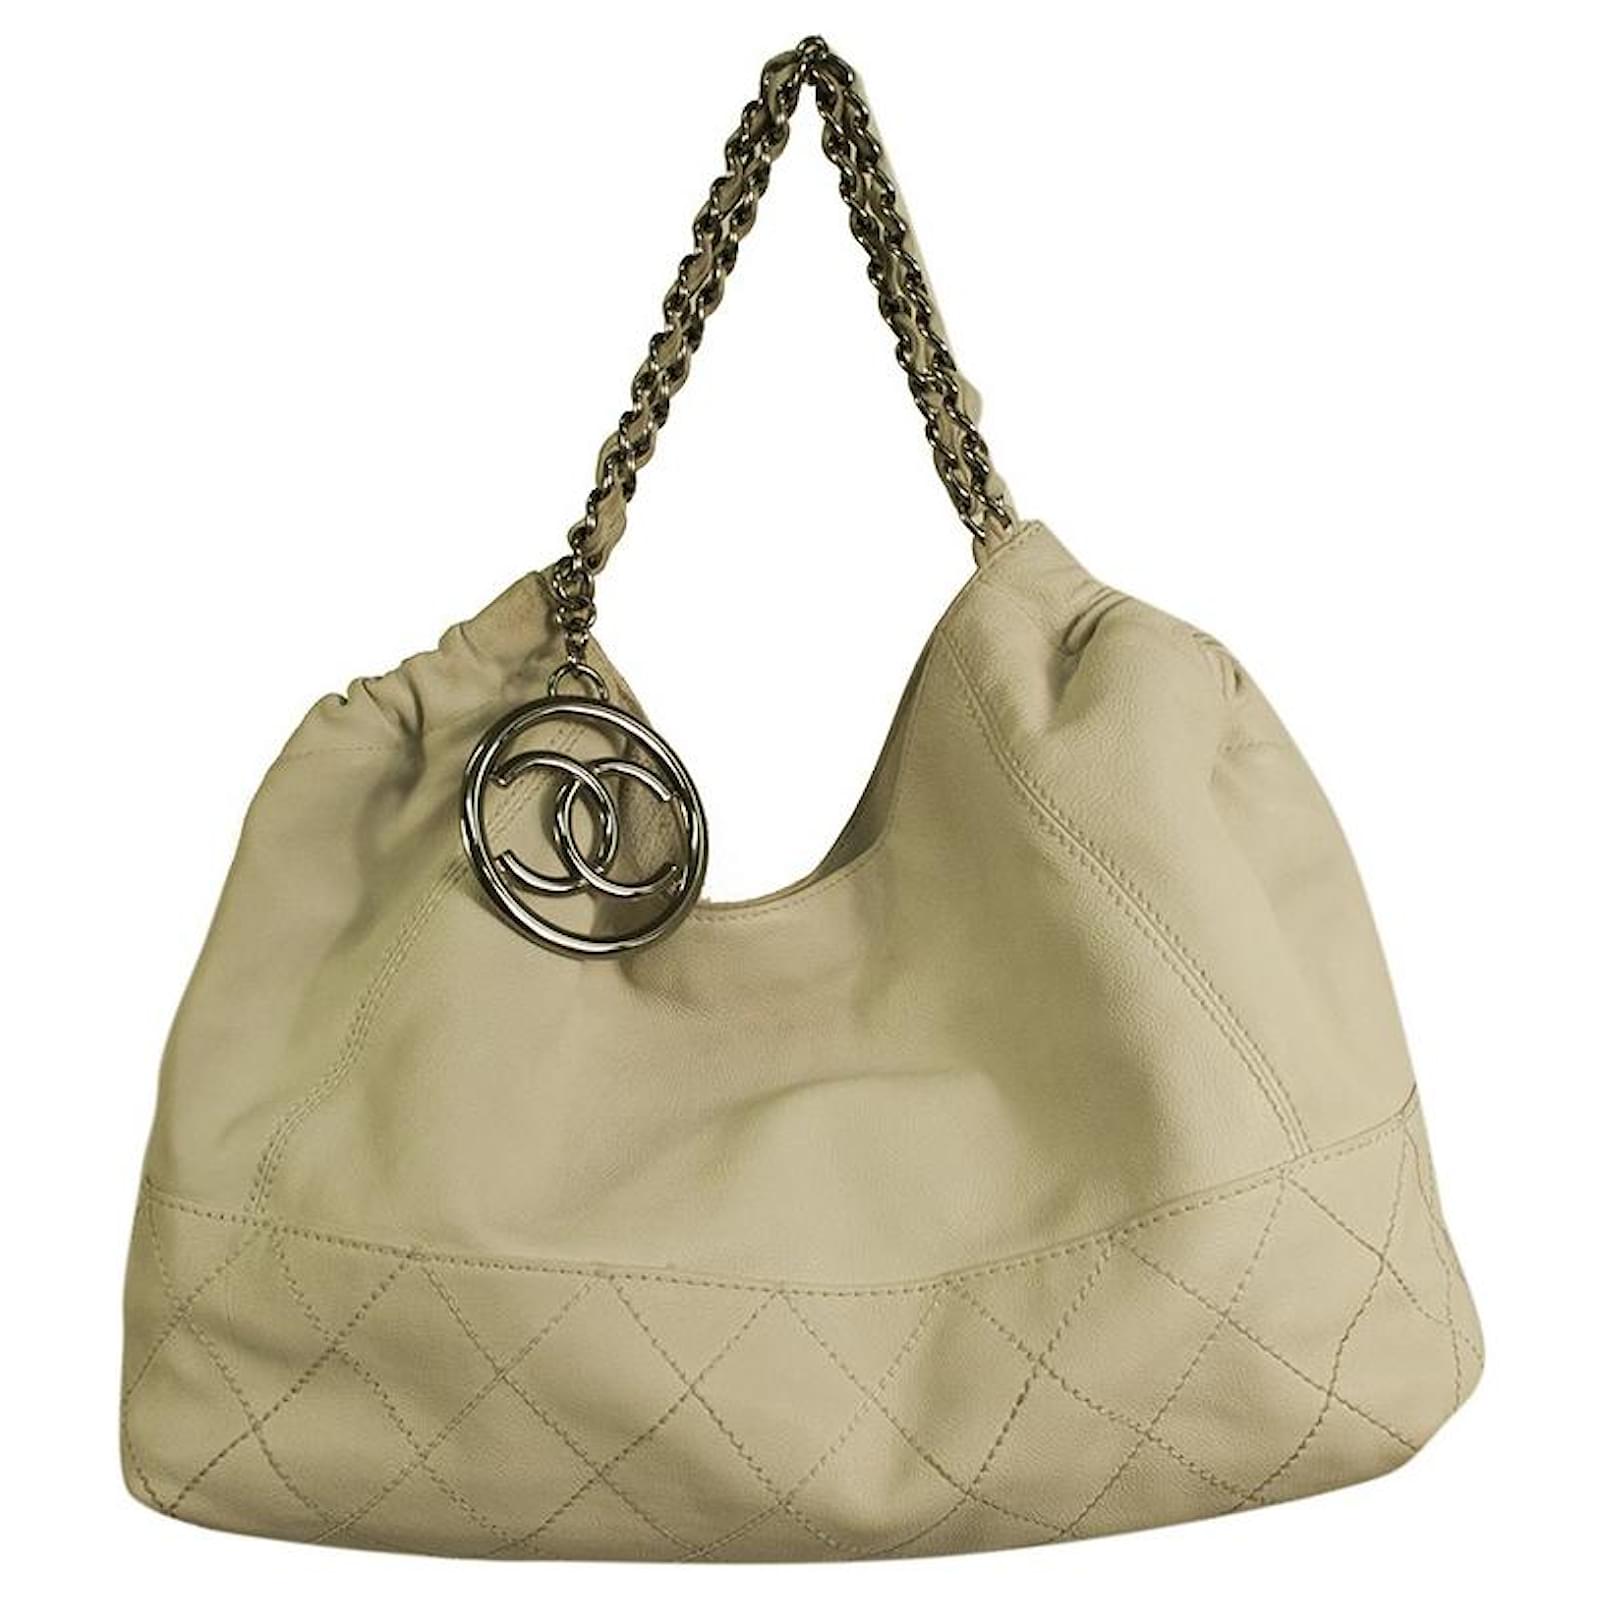 Chanel CC Coco Cabas calf leather off white leather large HOBO